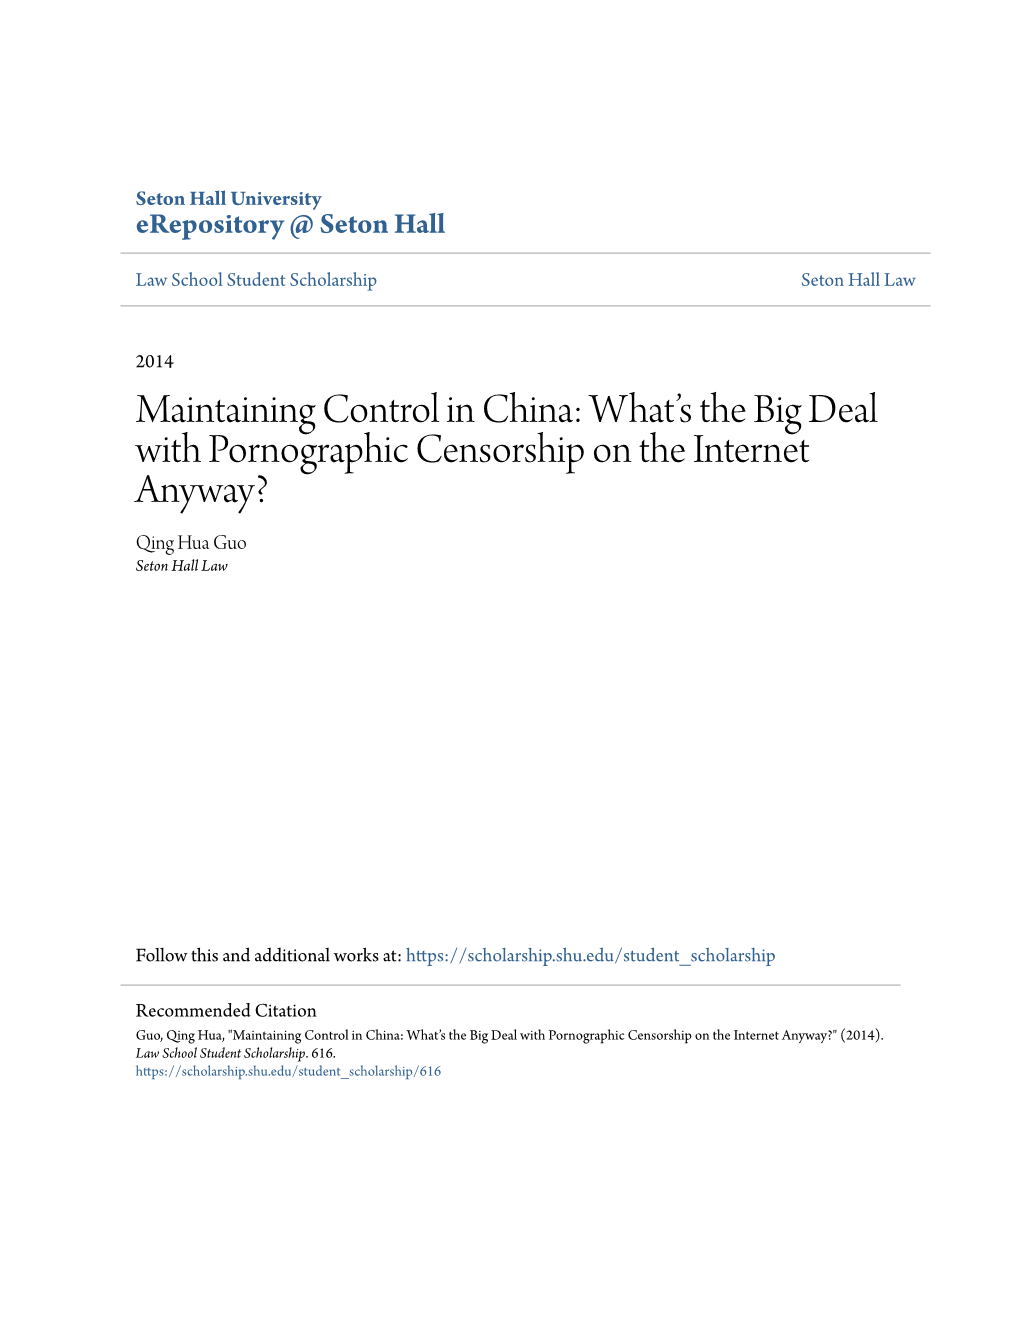 Maintaining Control in China: What’S the Big Deal with Pornographic Censorship on the Internet Anyway? Qing Hua Guo Seton Hall Law